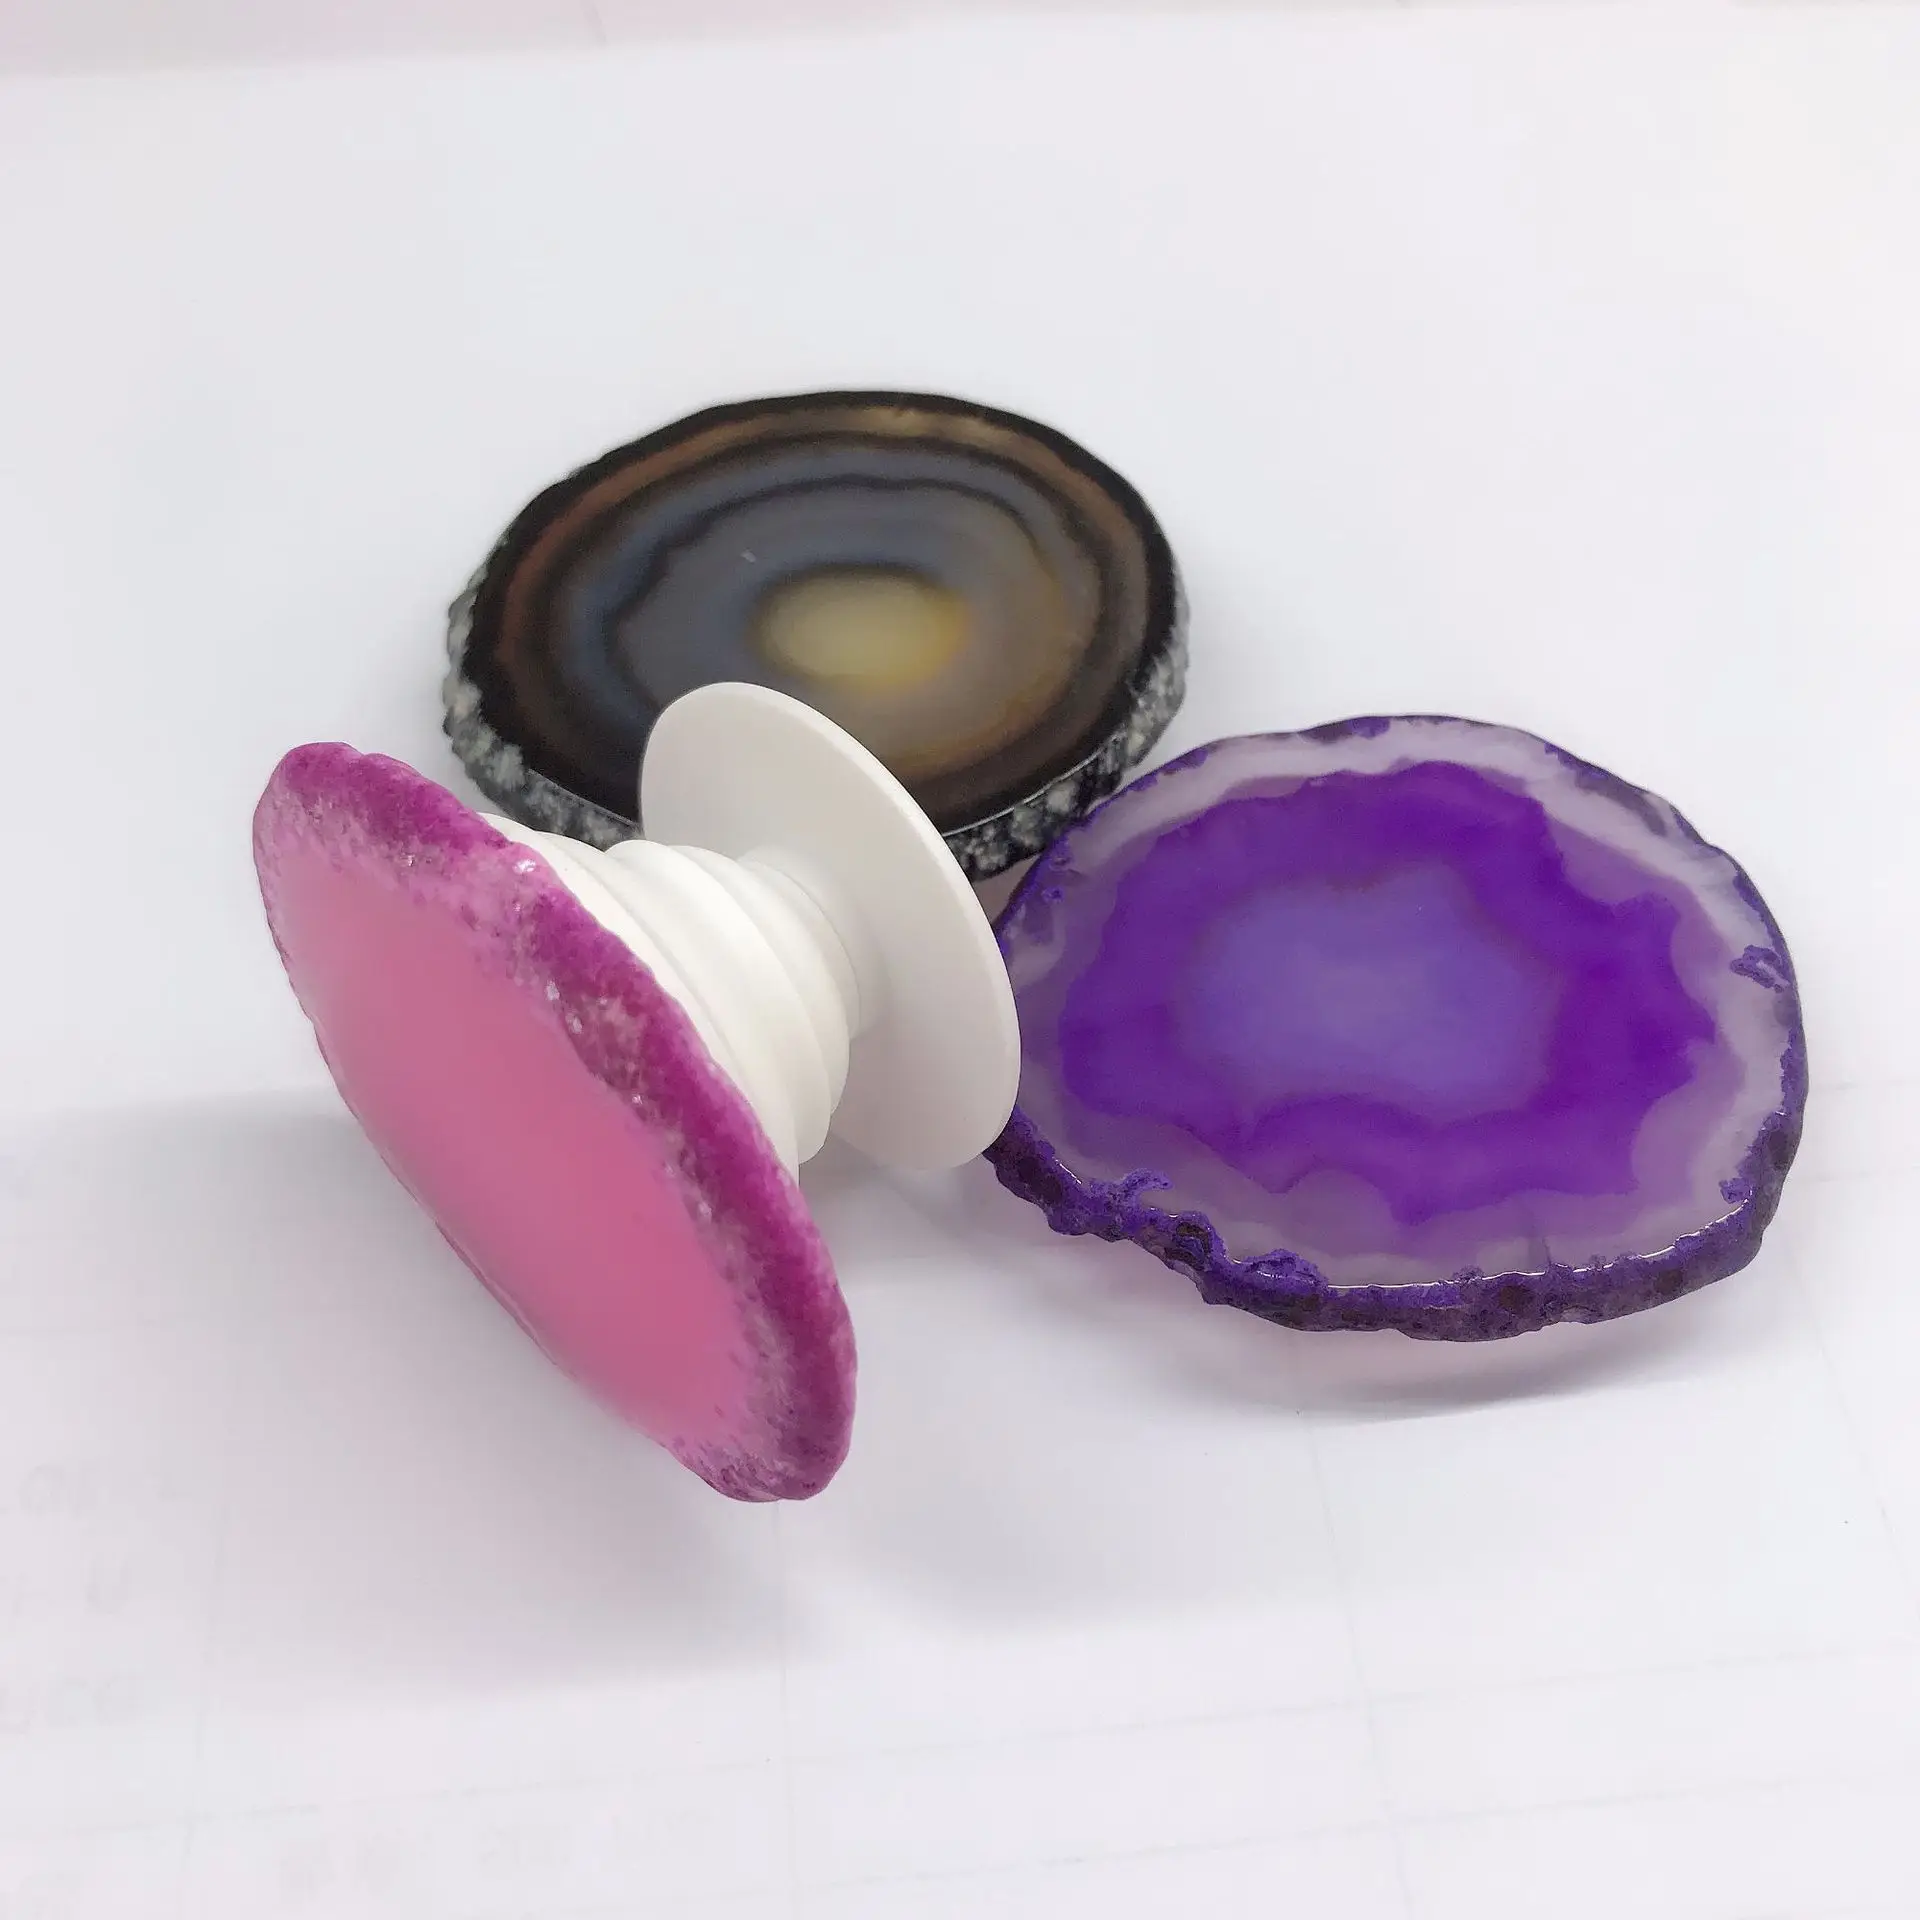 Fashional Expanding agate Phone Sockets Holder Phone Grip Stonesockets Grip and Stand for Phones